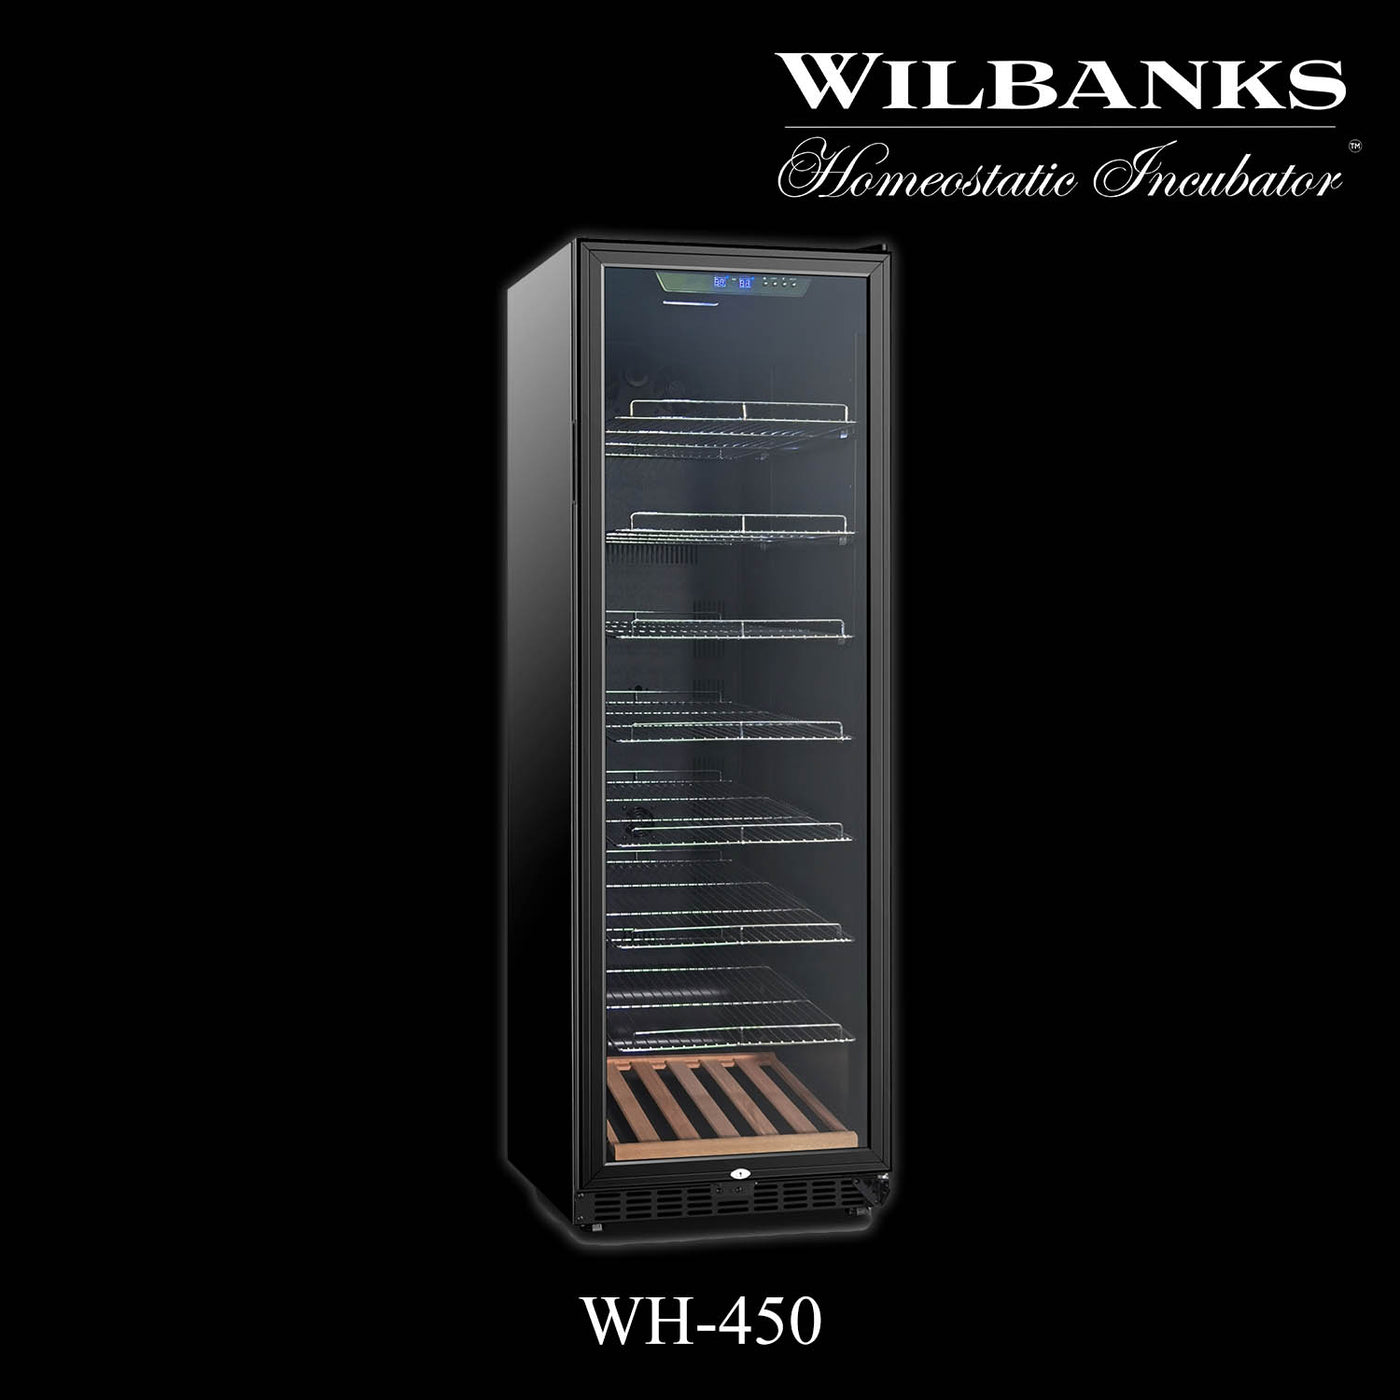 Wilbanks Homeostatic Incubator™  WH-450 (Capacity - 35 Ball Python Clutches*)